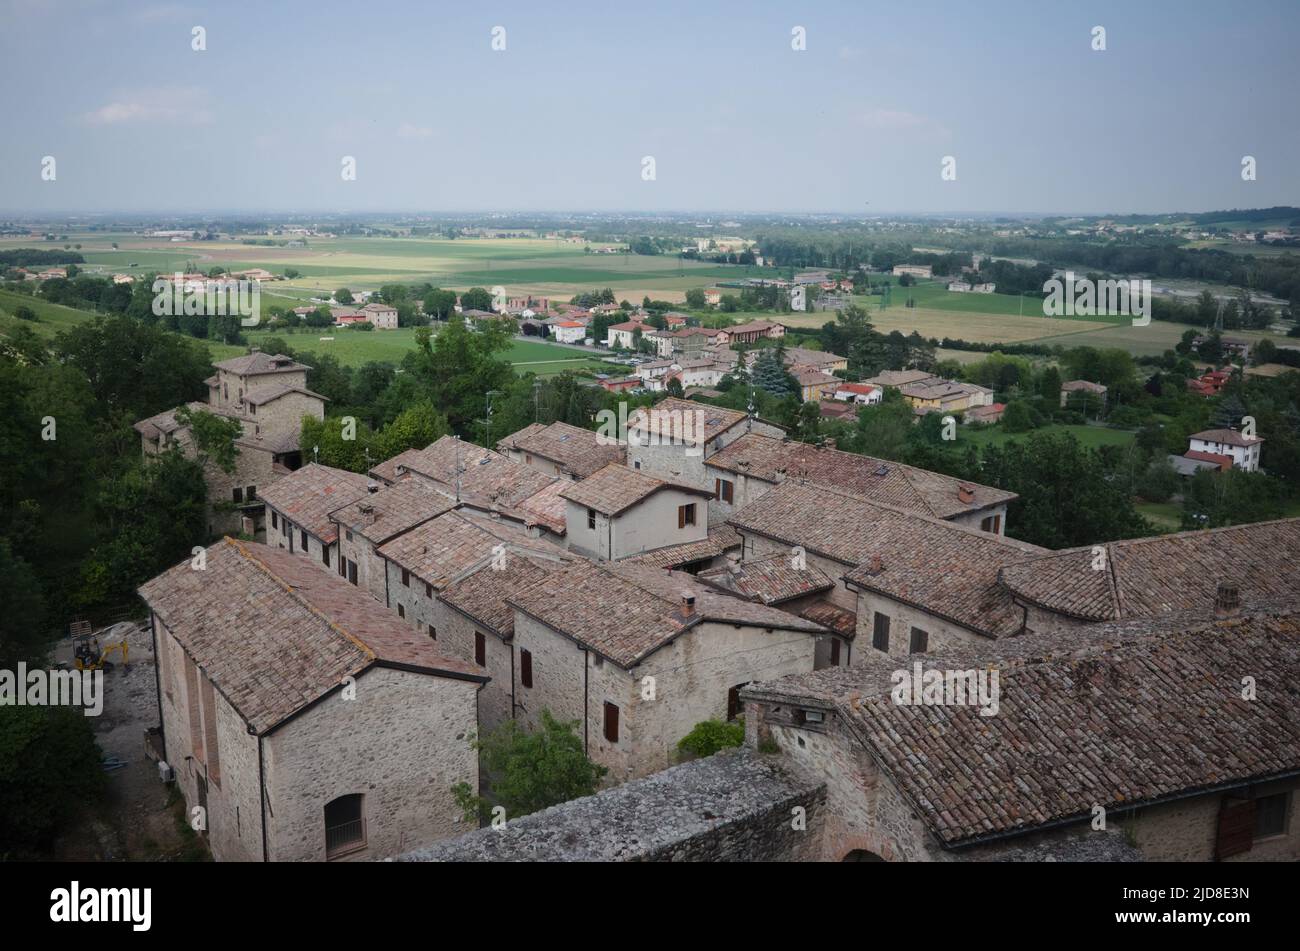 Torrechiara, Parma, Italy - June, 2022: Top view of tiled rooftops of old houses in Italian village and valley with harvested agricultural fields Stock Photo